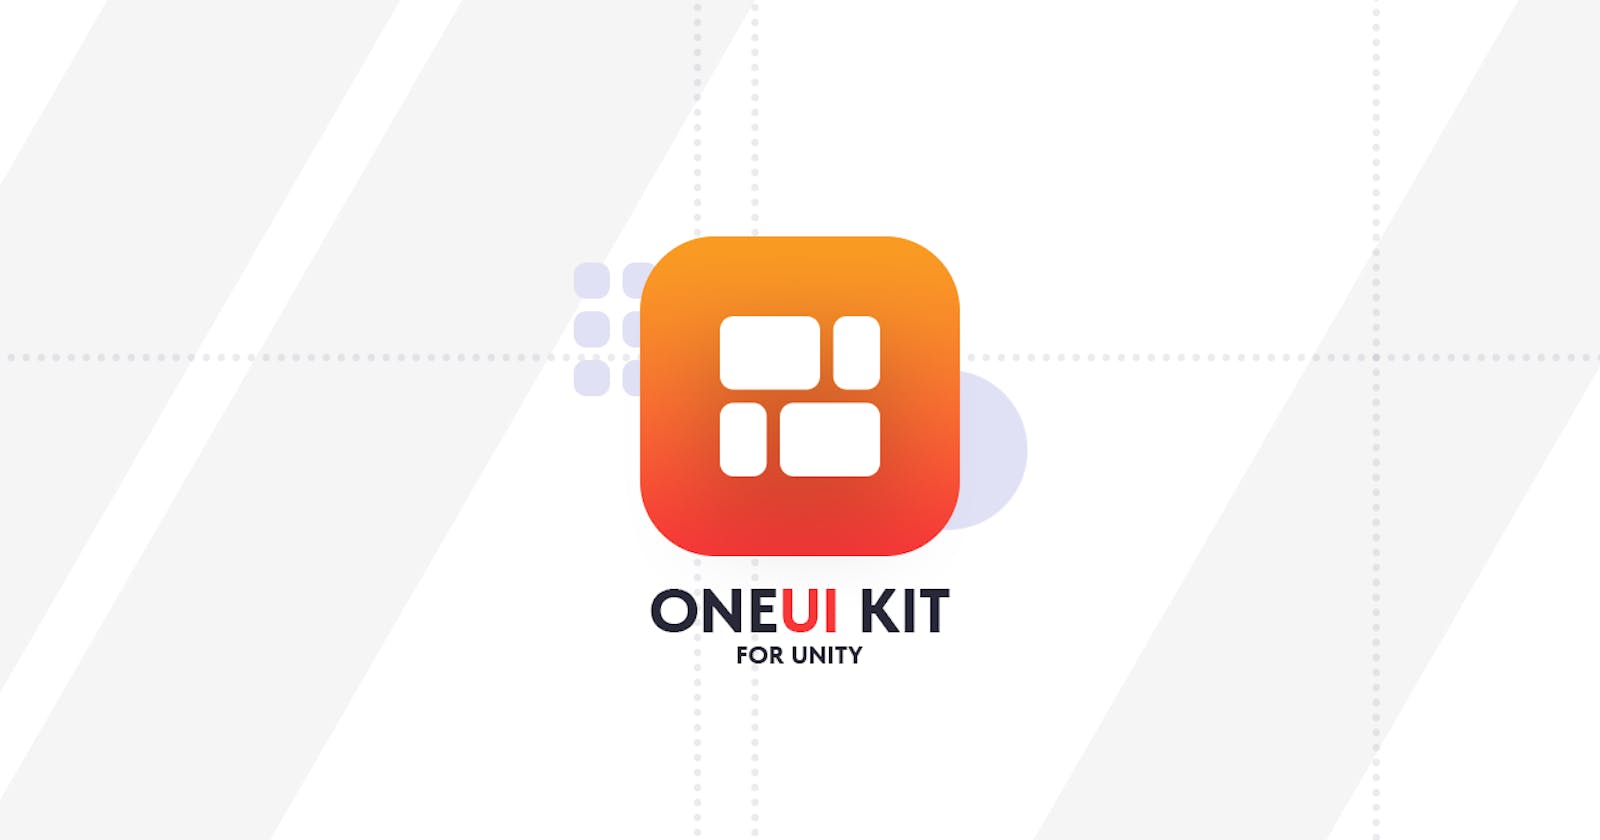 One UI Kit - A Complete and Modern UI Kit for your Unity Games